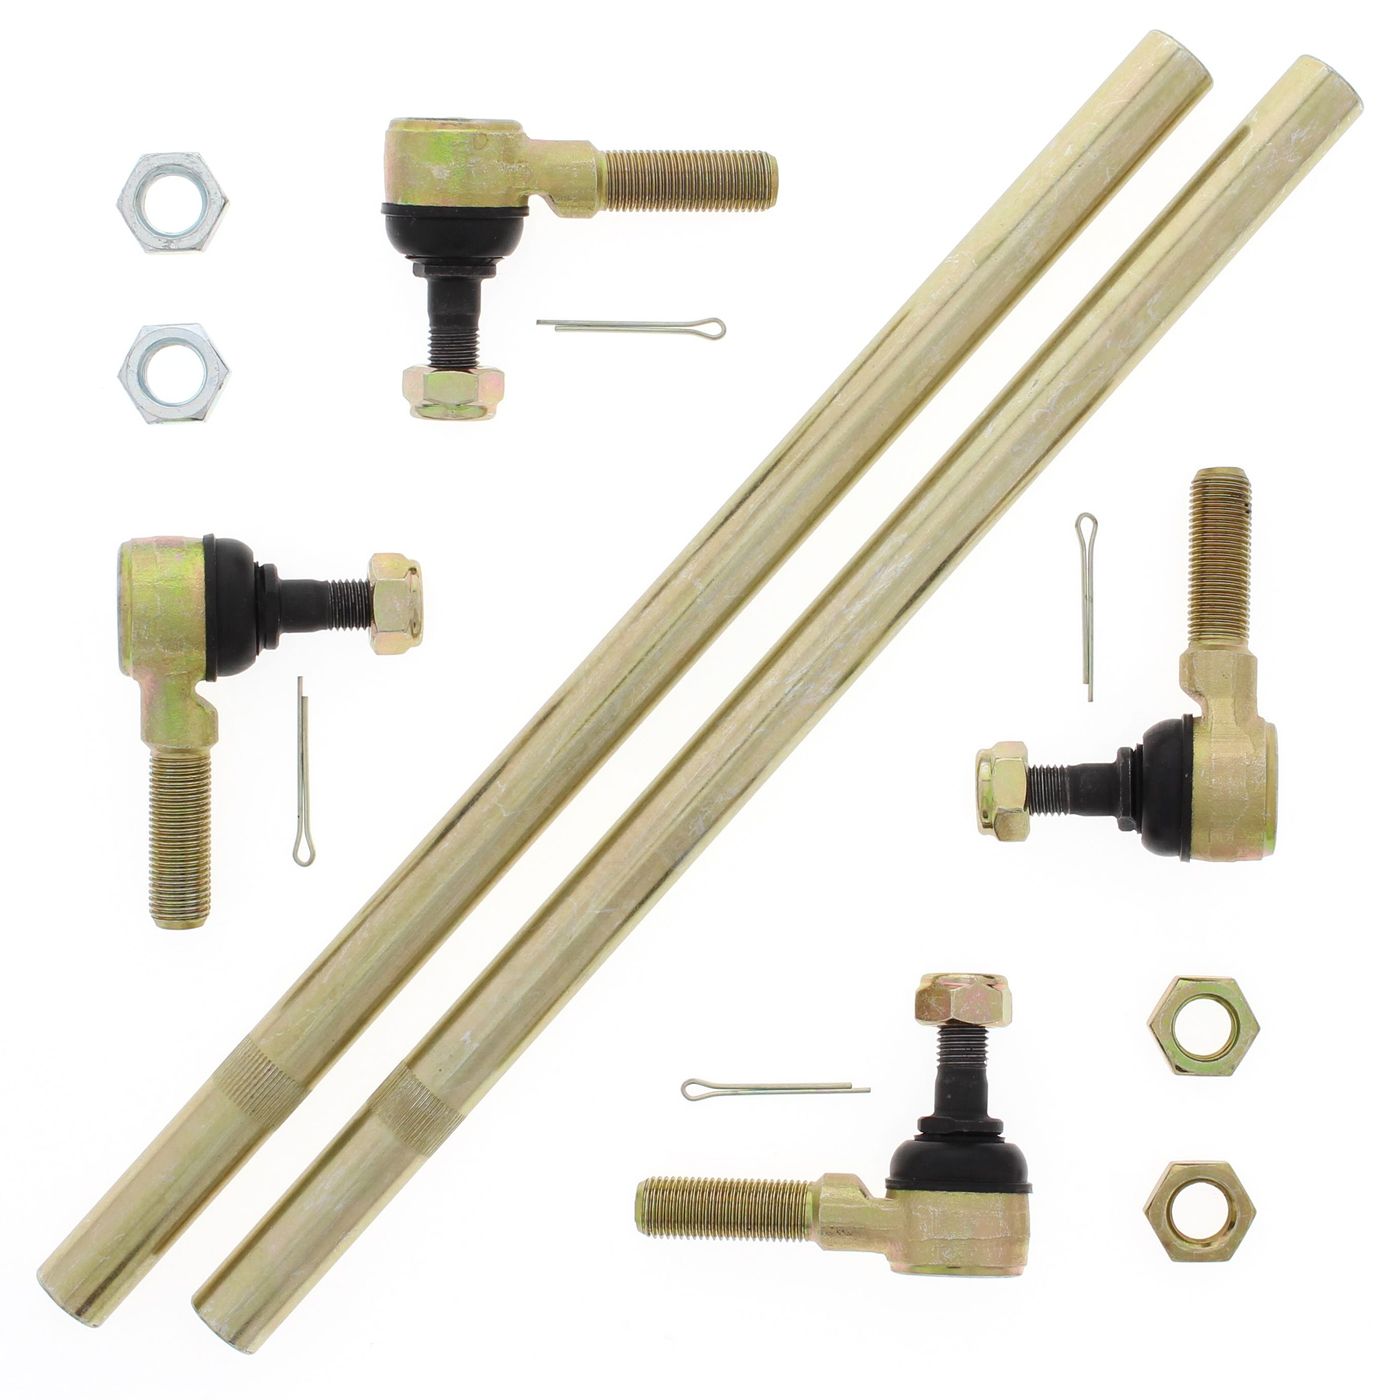 Wrp Tie Rod Kits - WRP521013 image